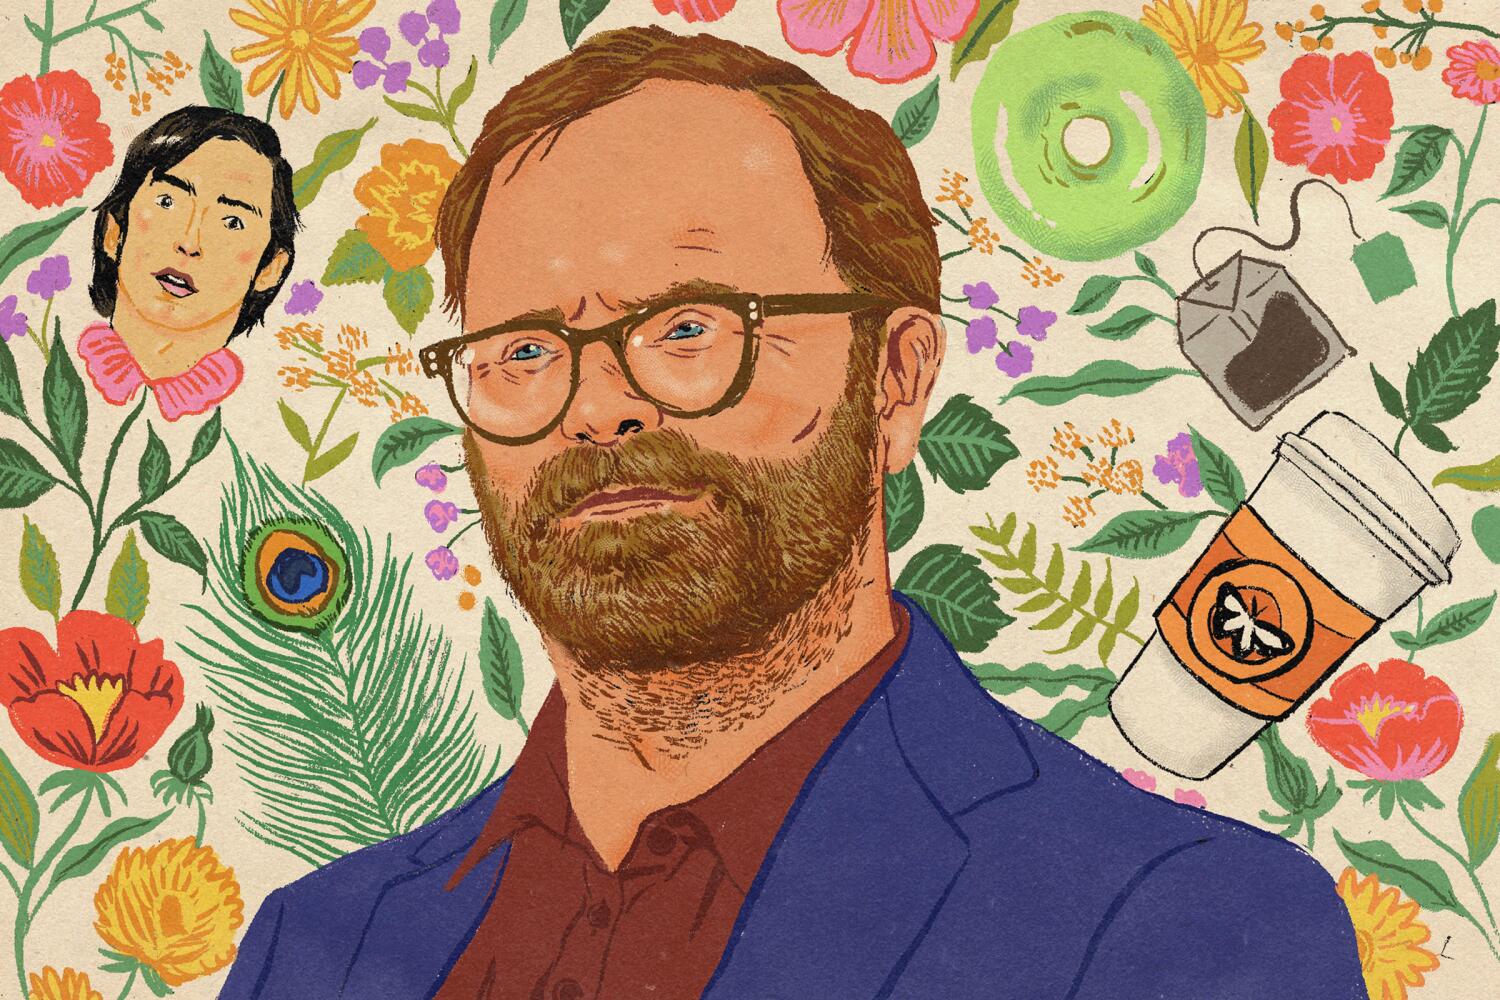 How to have the best Sunday in L.A., according to Rainn Wilson